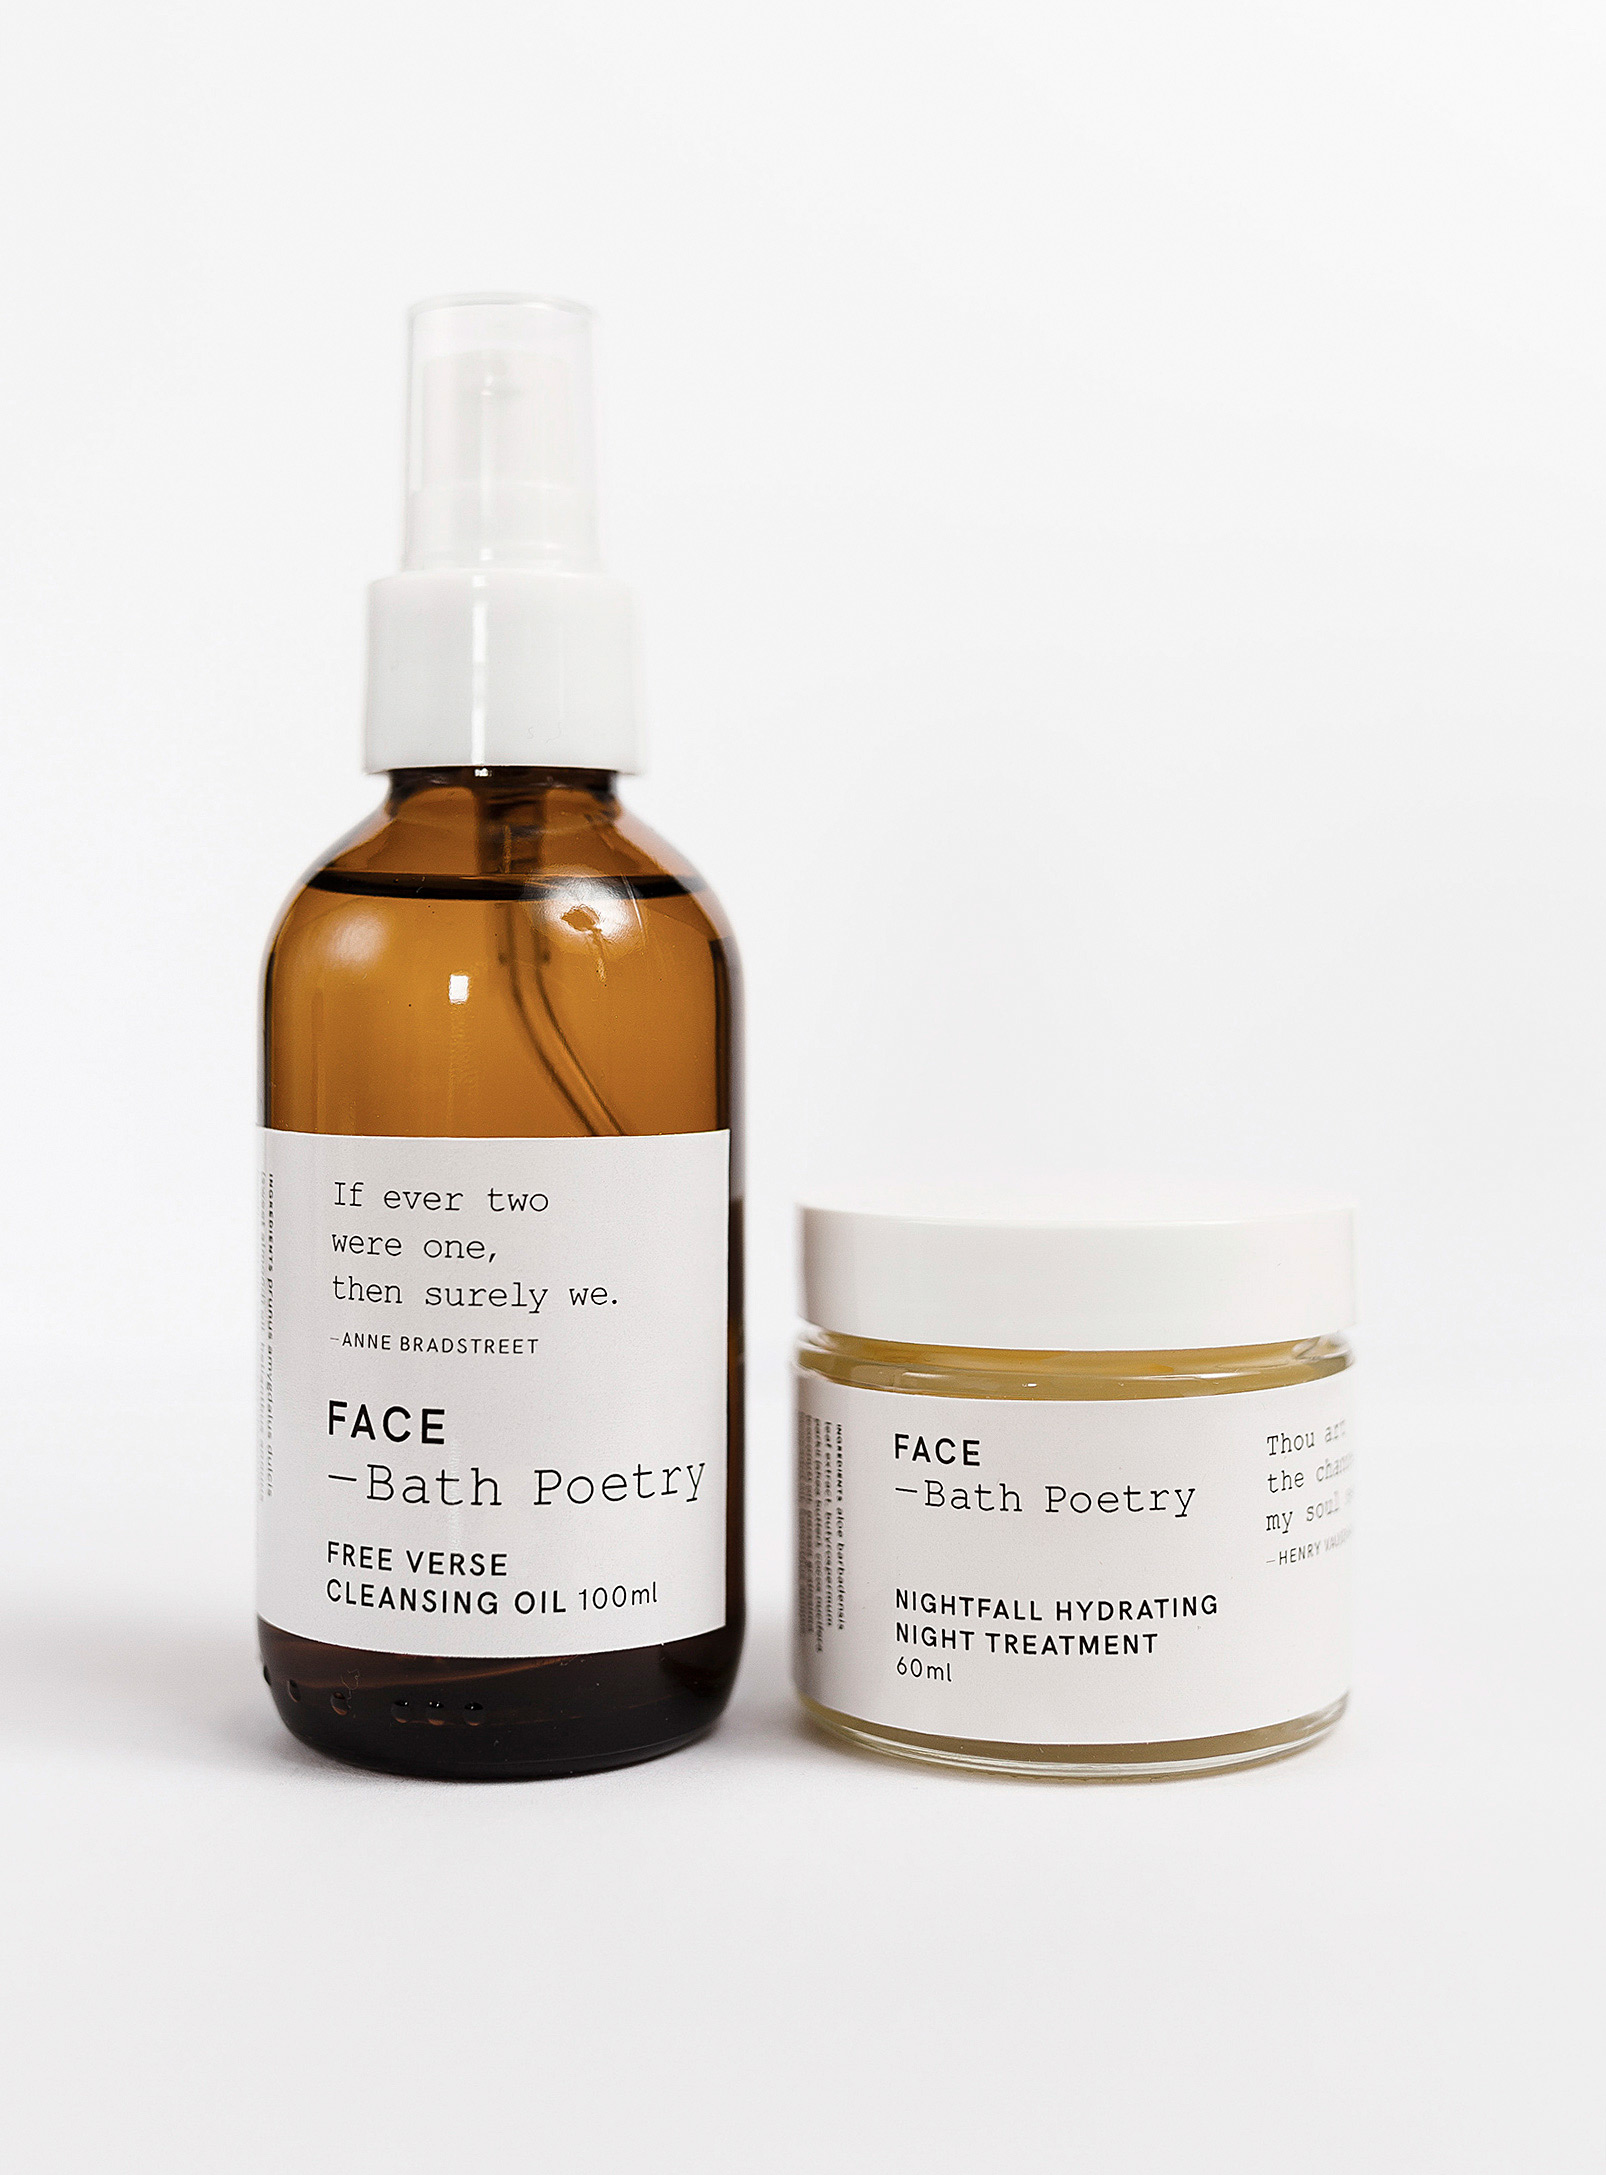 Bath Poetry - Facial cleansing oil and night treatment set